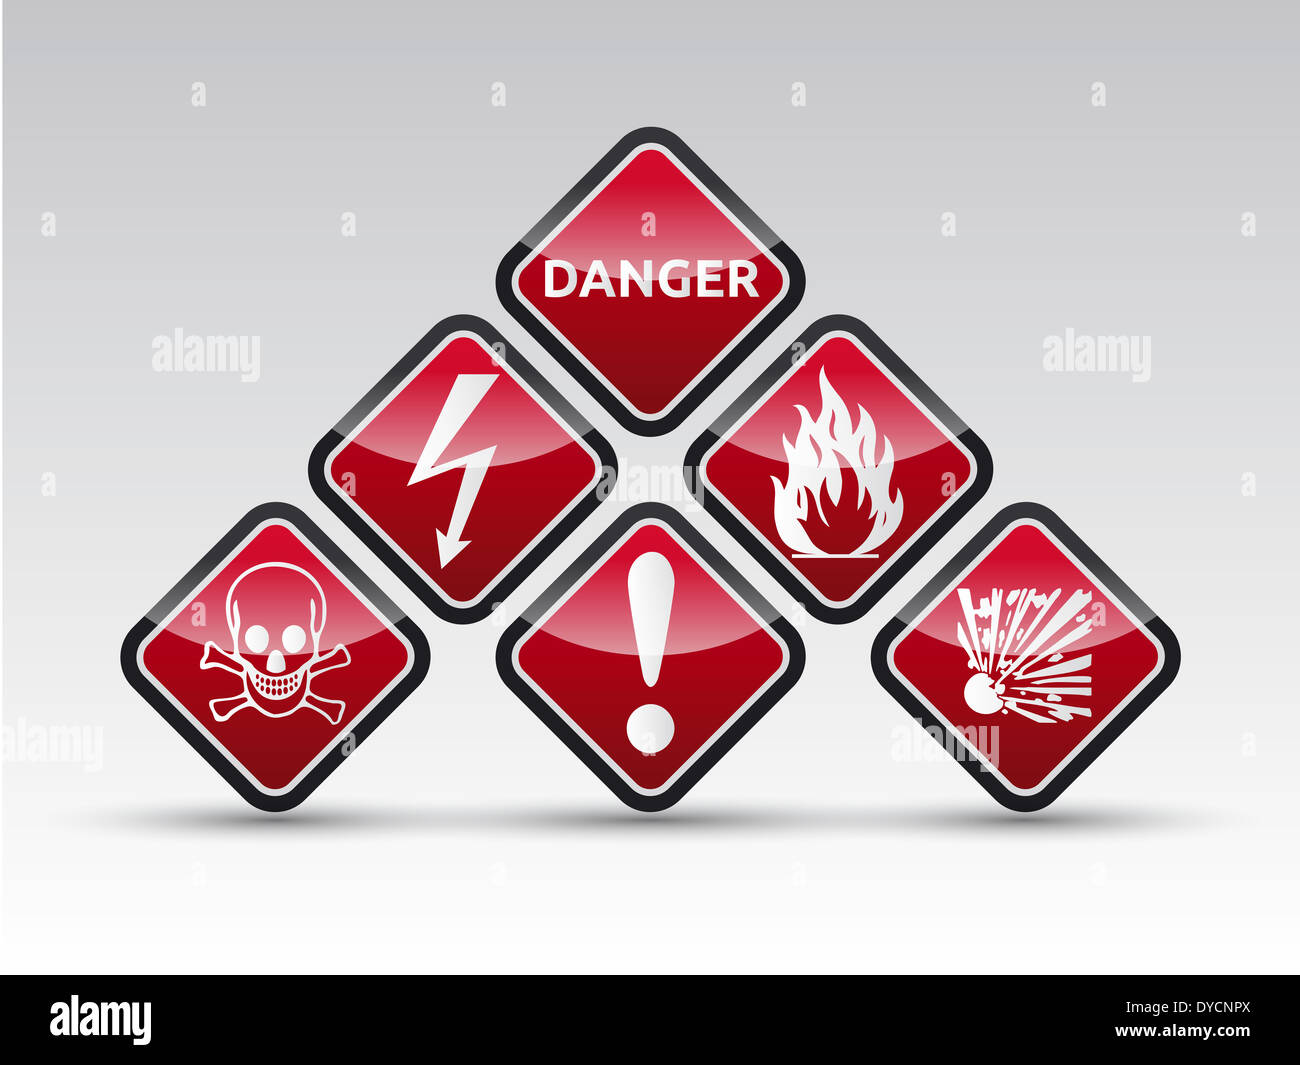 Isolated red Danger sign collection with black border, reflection and shadow on light background Stock Photo